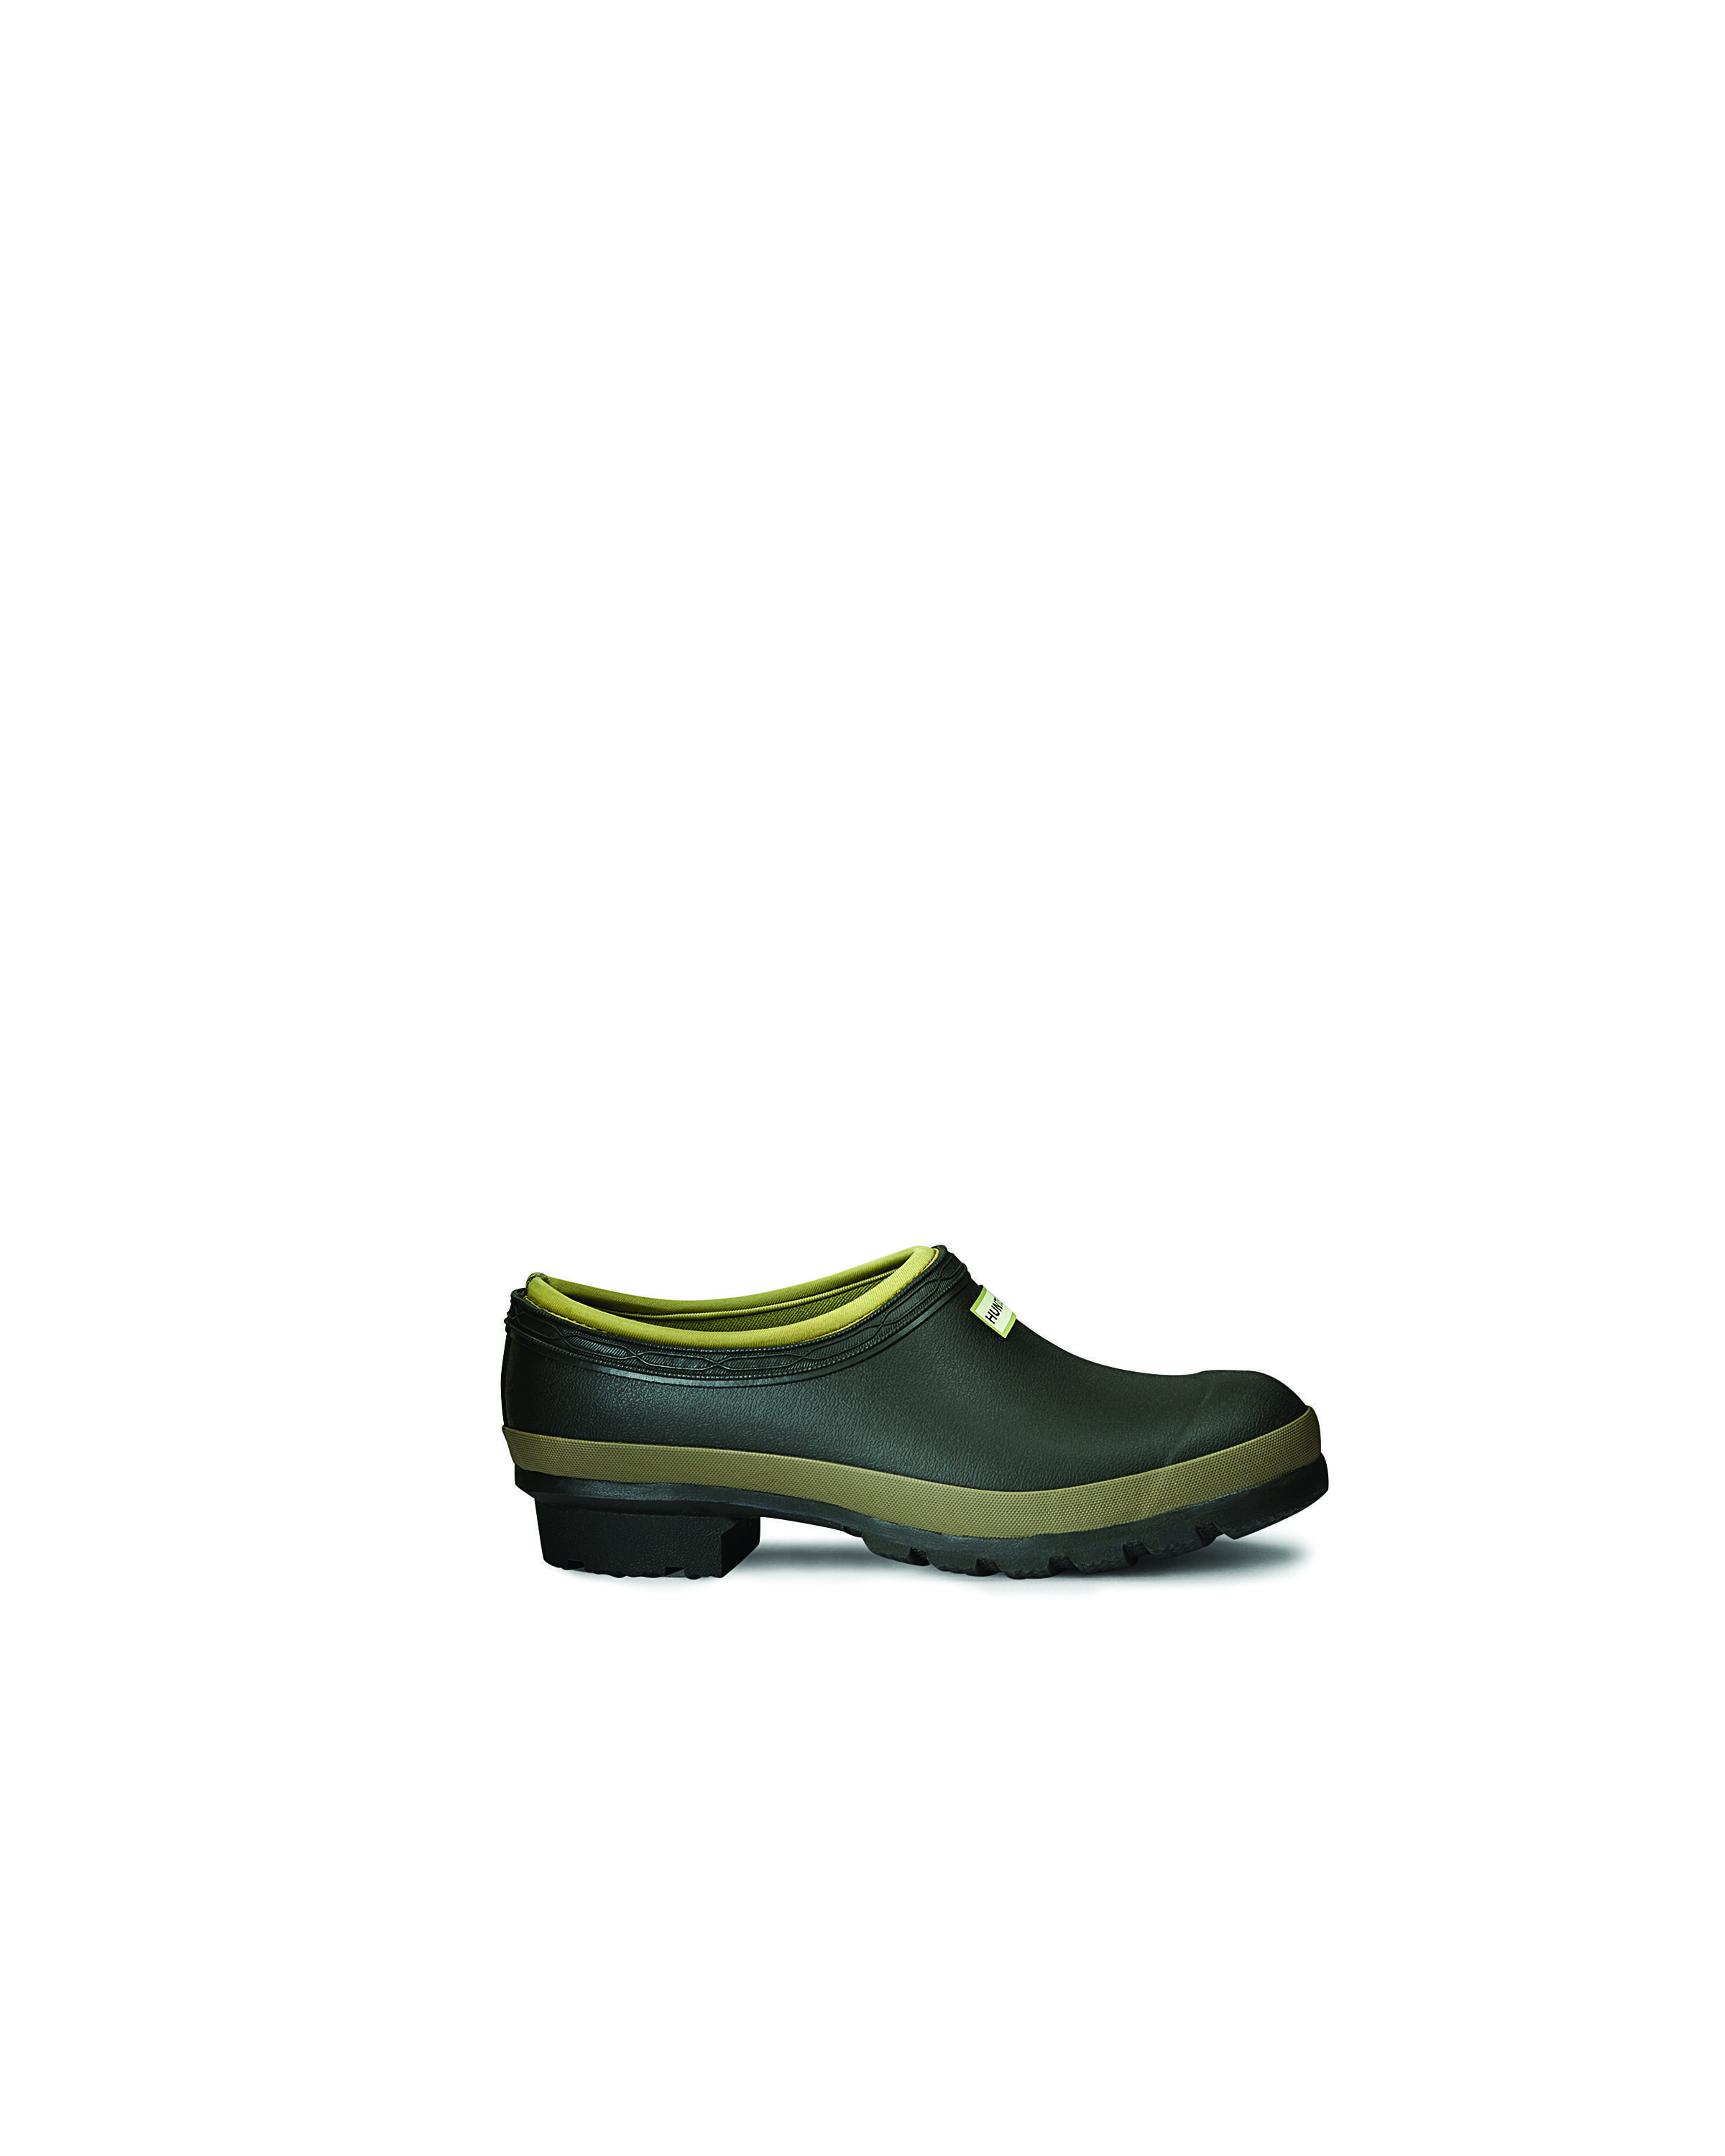 garden shoes with arch support